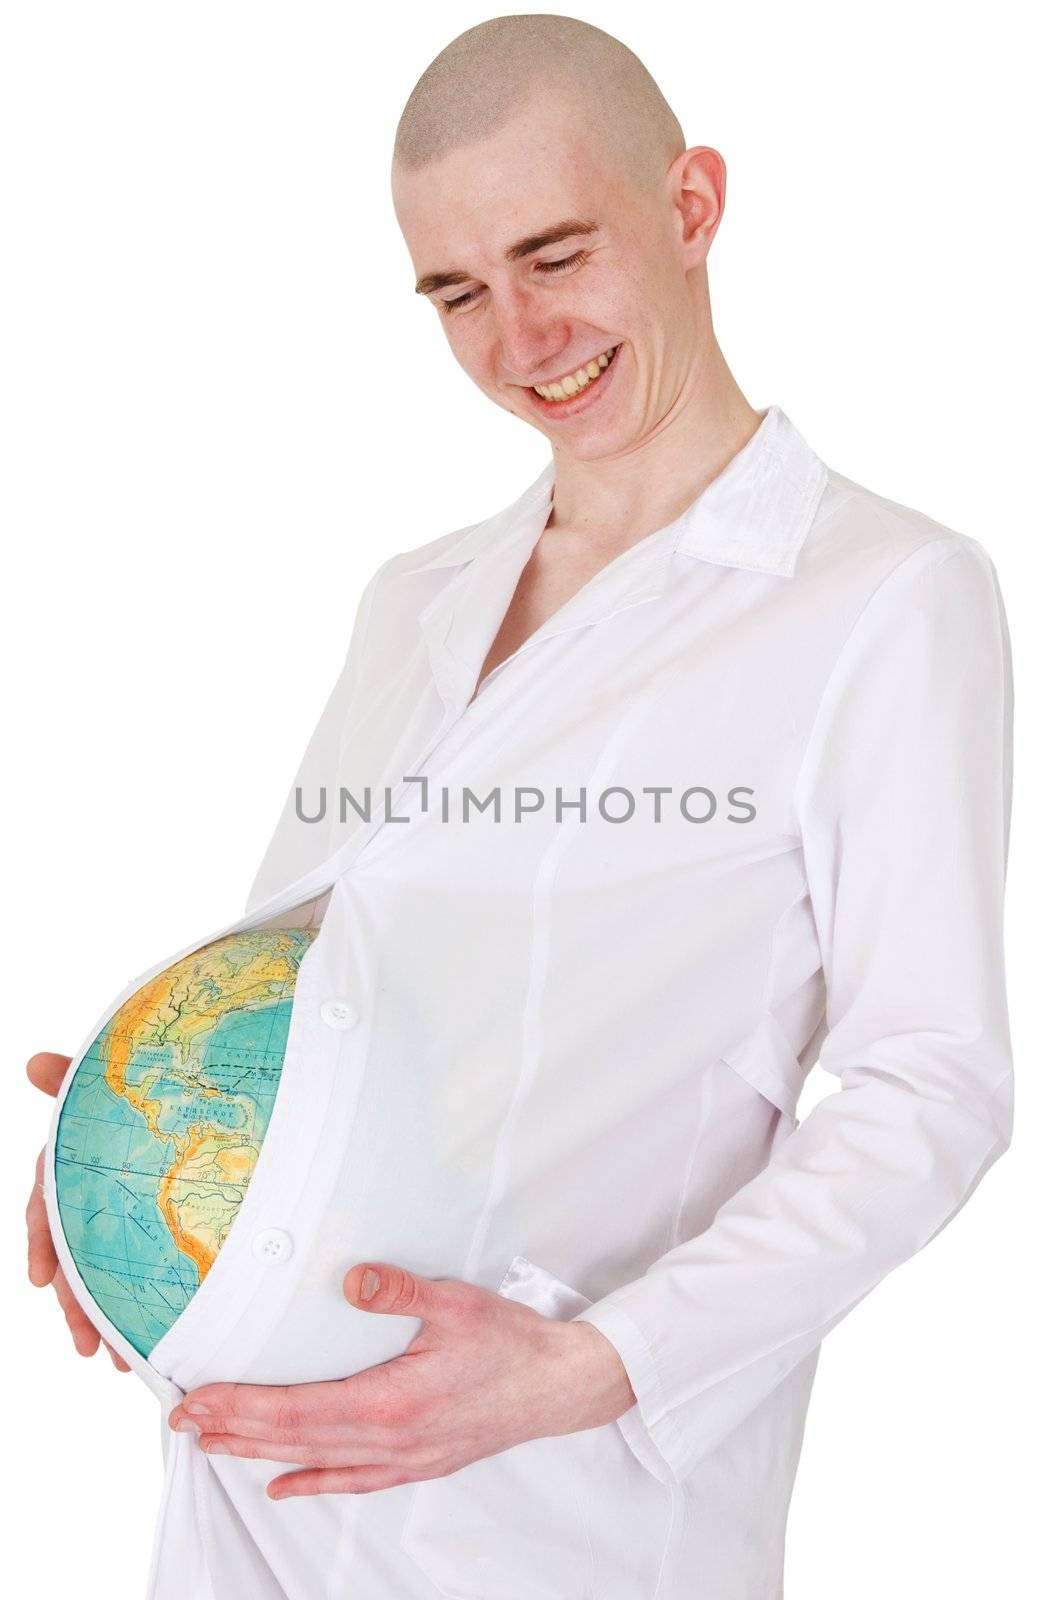 Terrestrial globe and man in doctor's smock on the white background